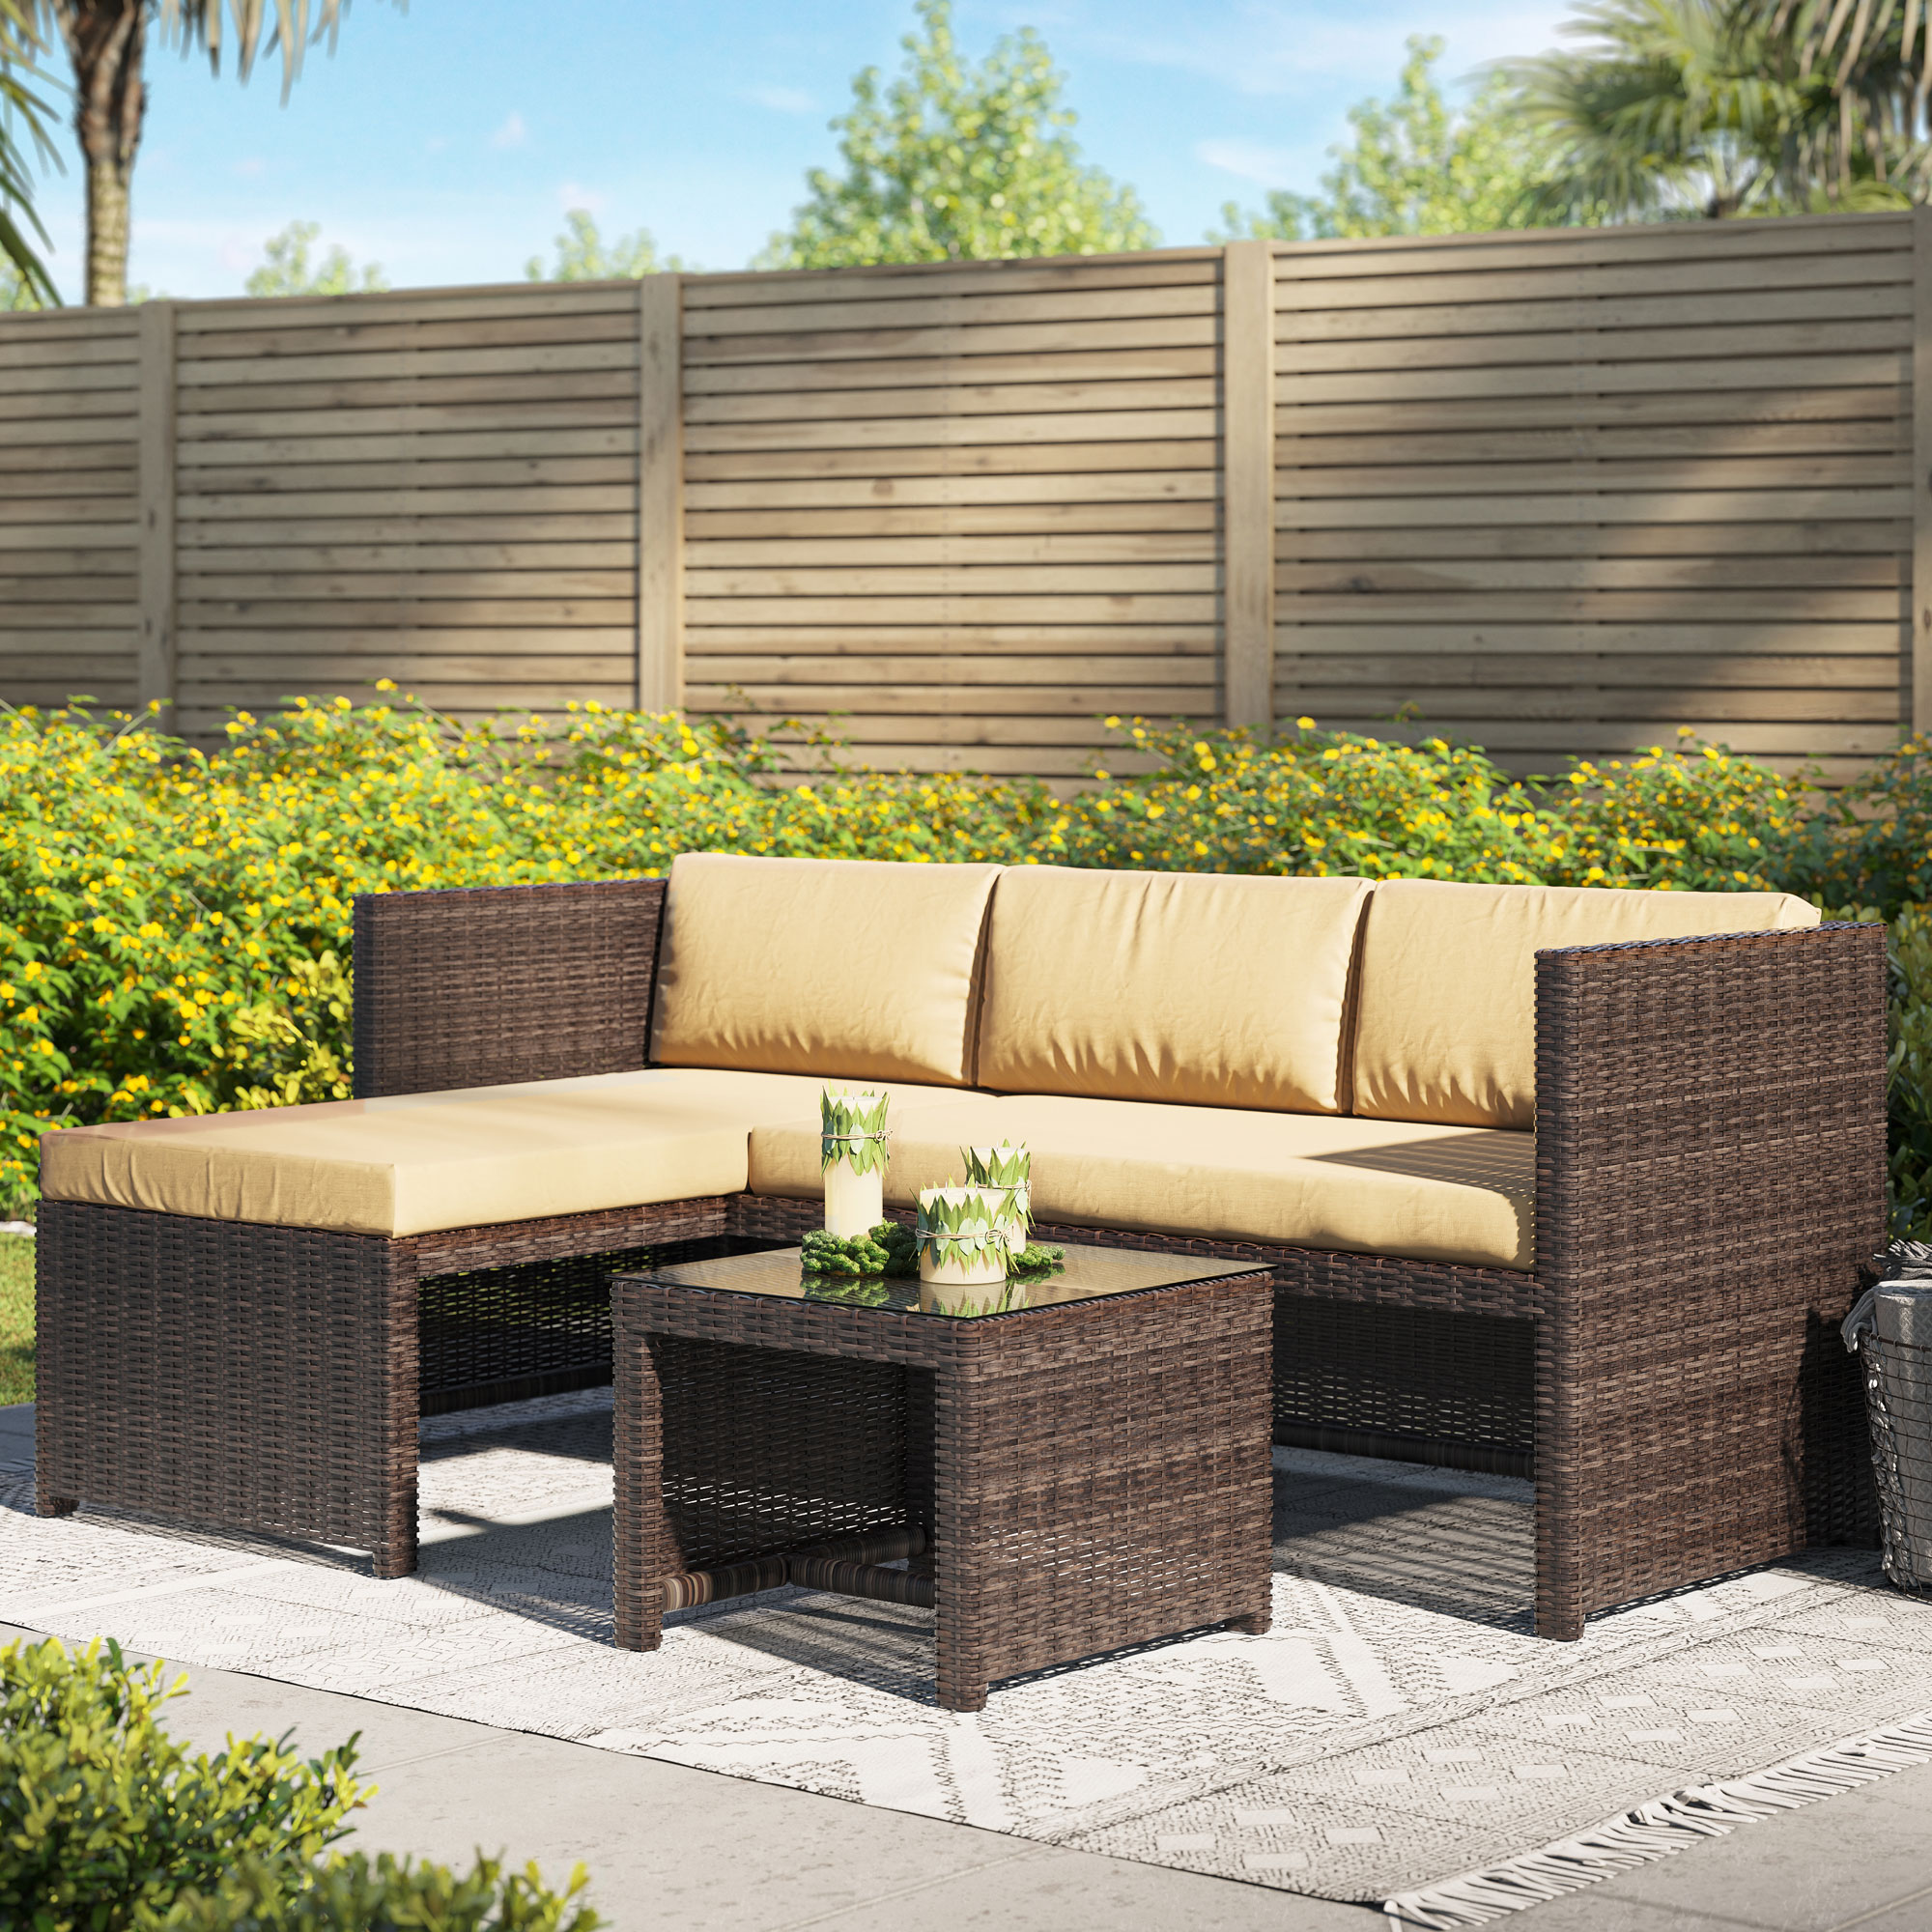 BELLEZE Balboa 3 Piece Patio Conversation Set All-Weather Wicker Rattan Corner Sofa with Cushion and Glass Table, Brown - image 1 of 7